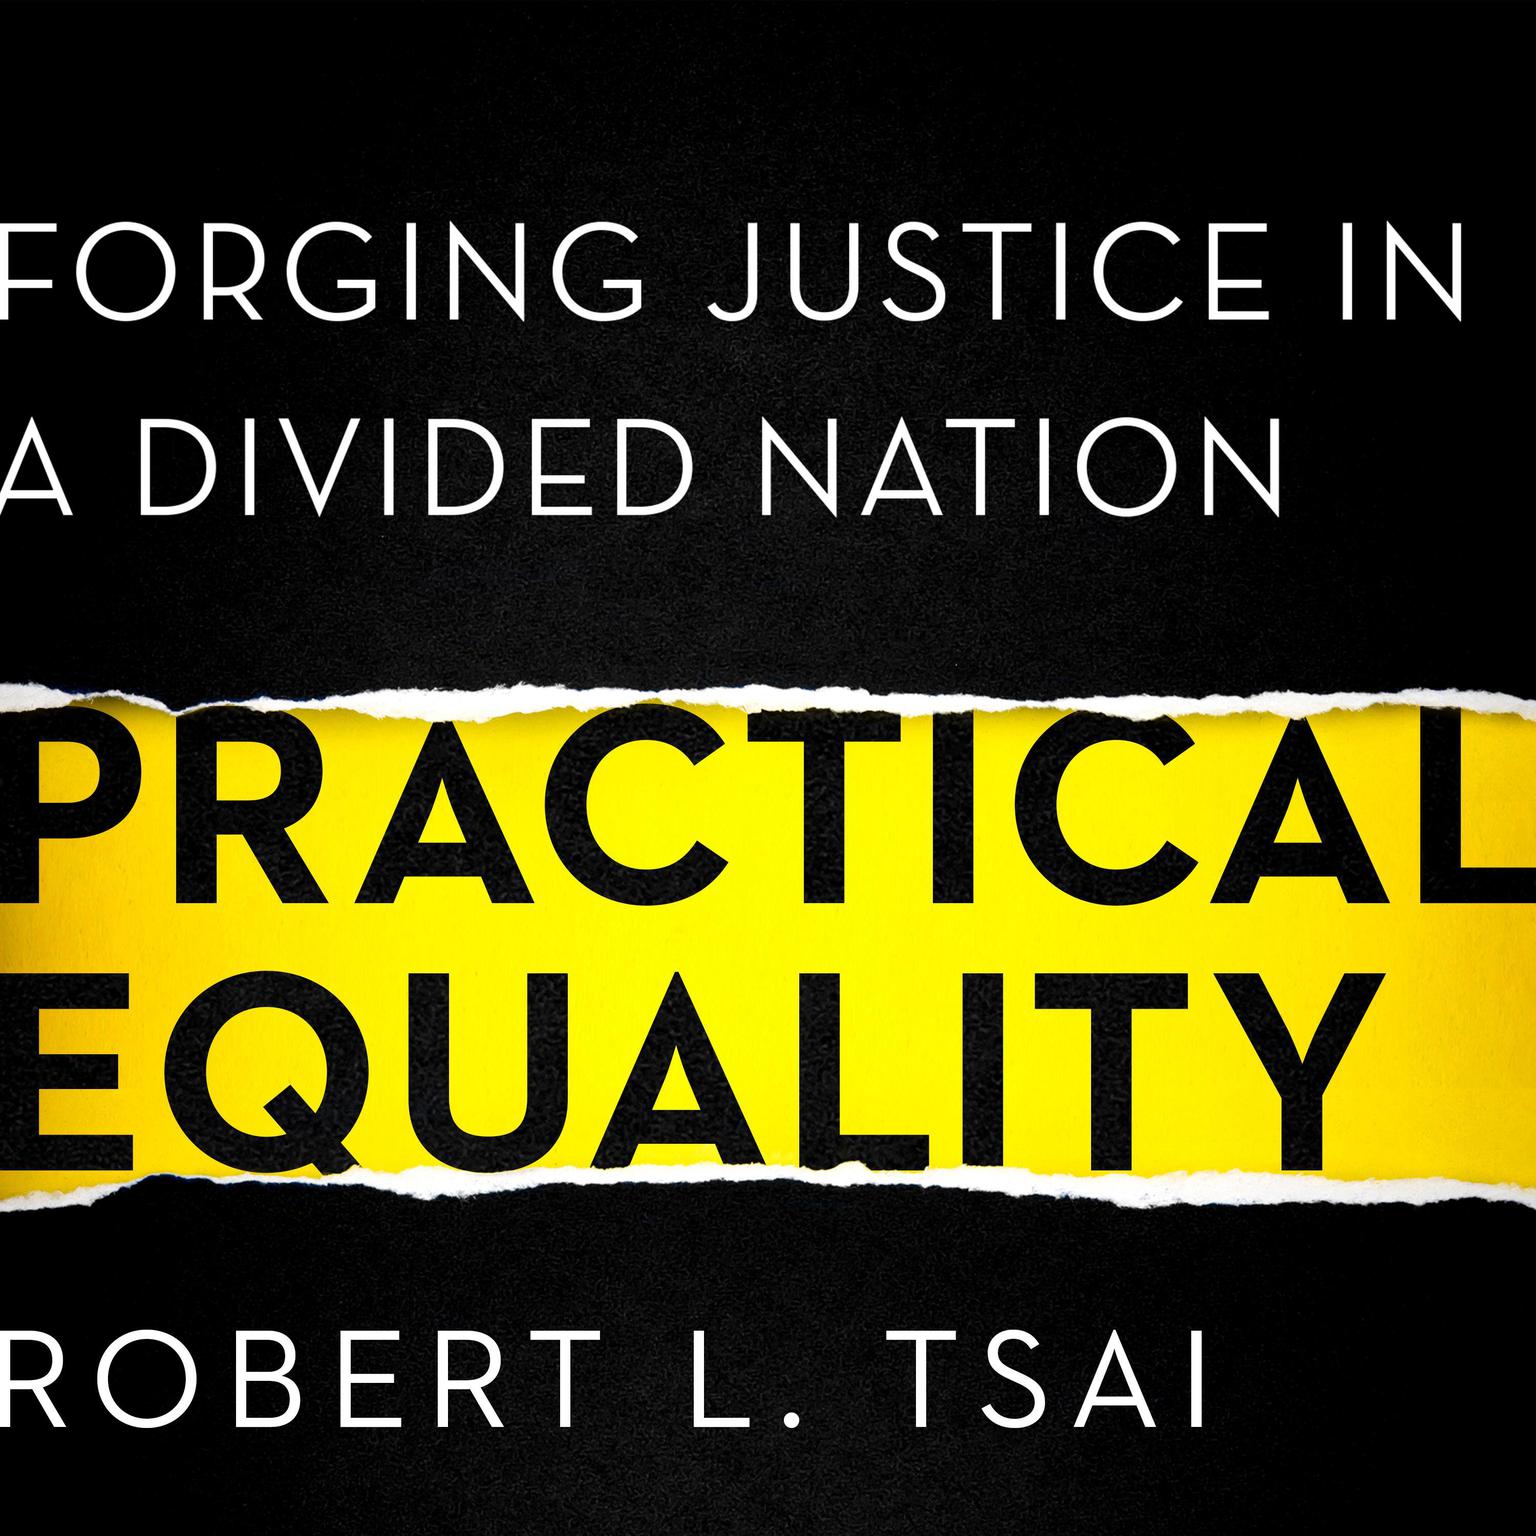 Practical Equality: Forging Justice in a Divided Nation Audiobook, by Robert Tsai